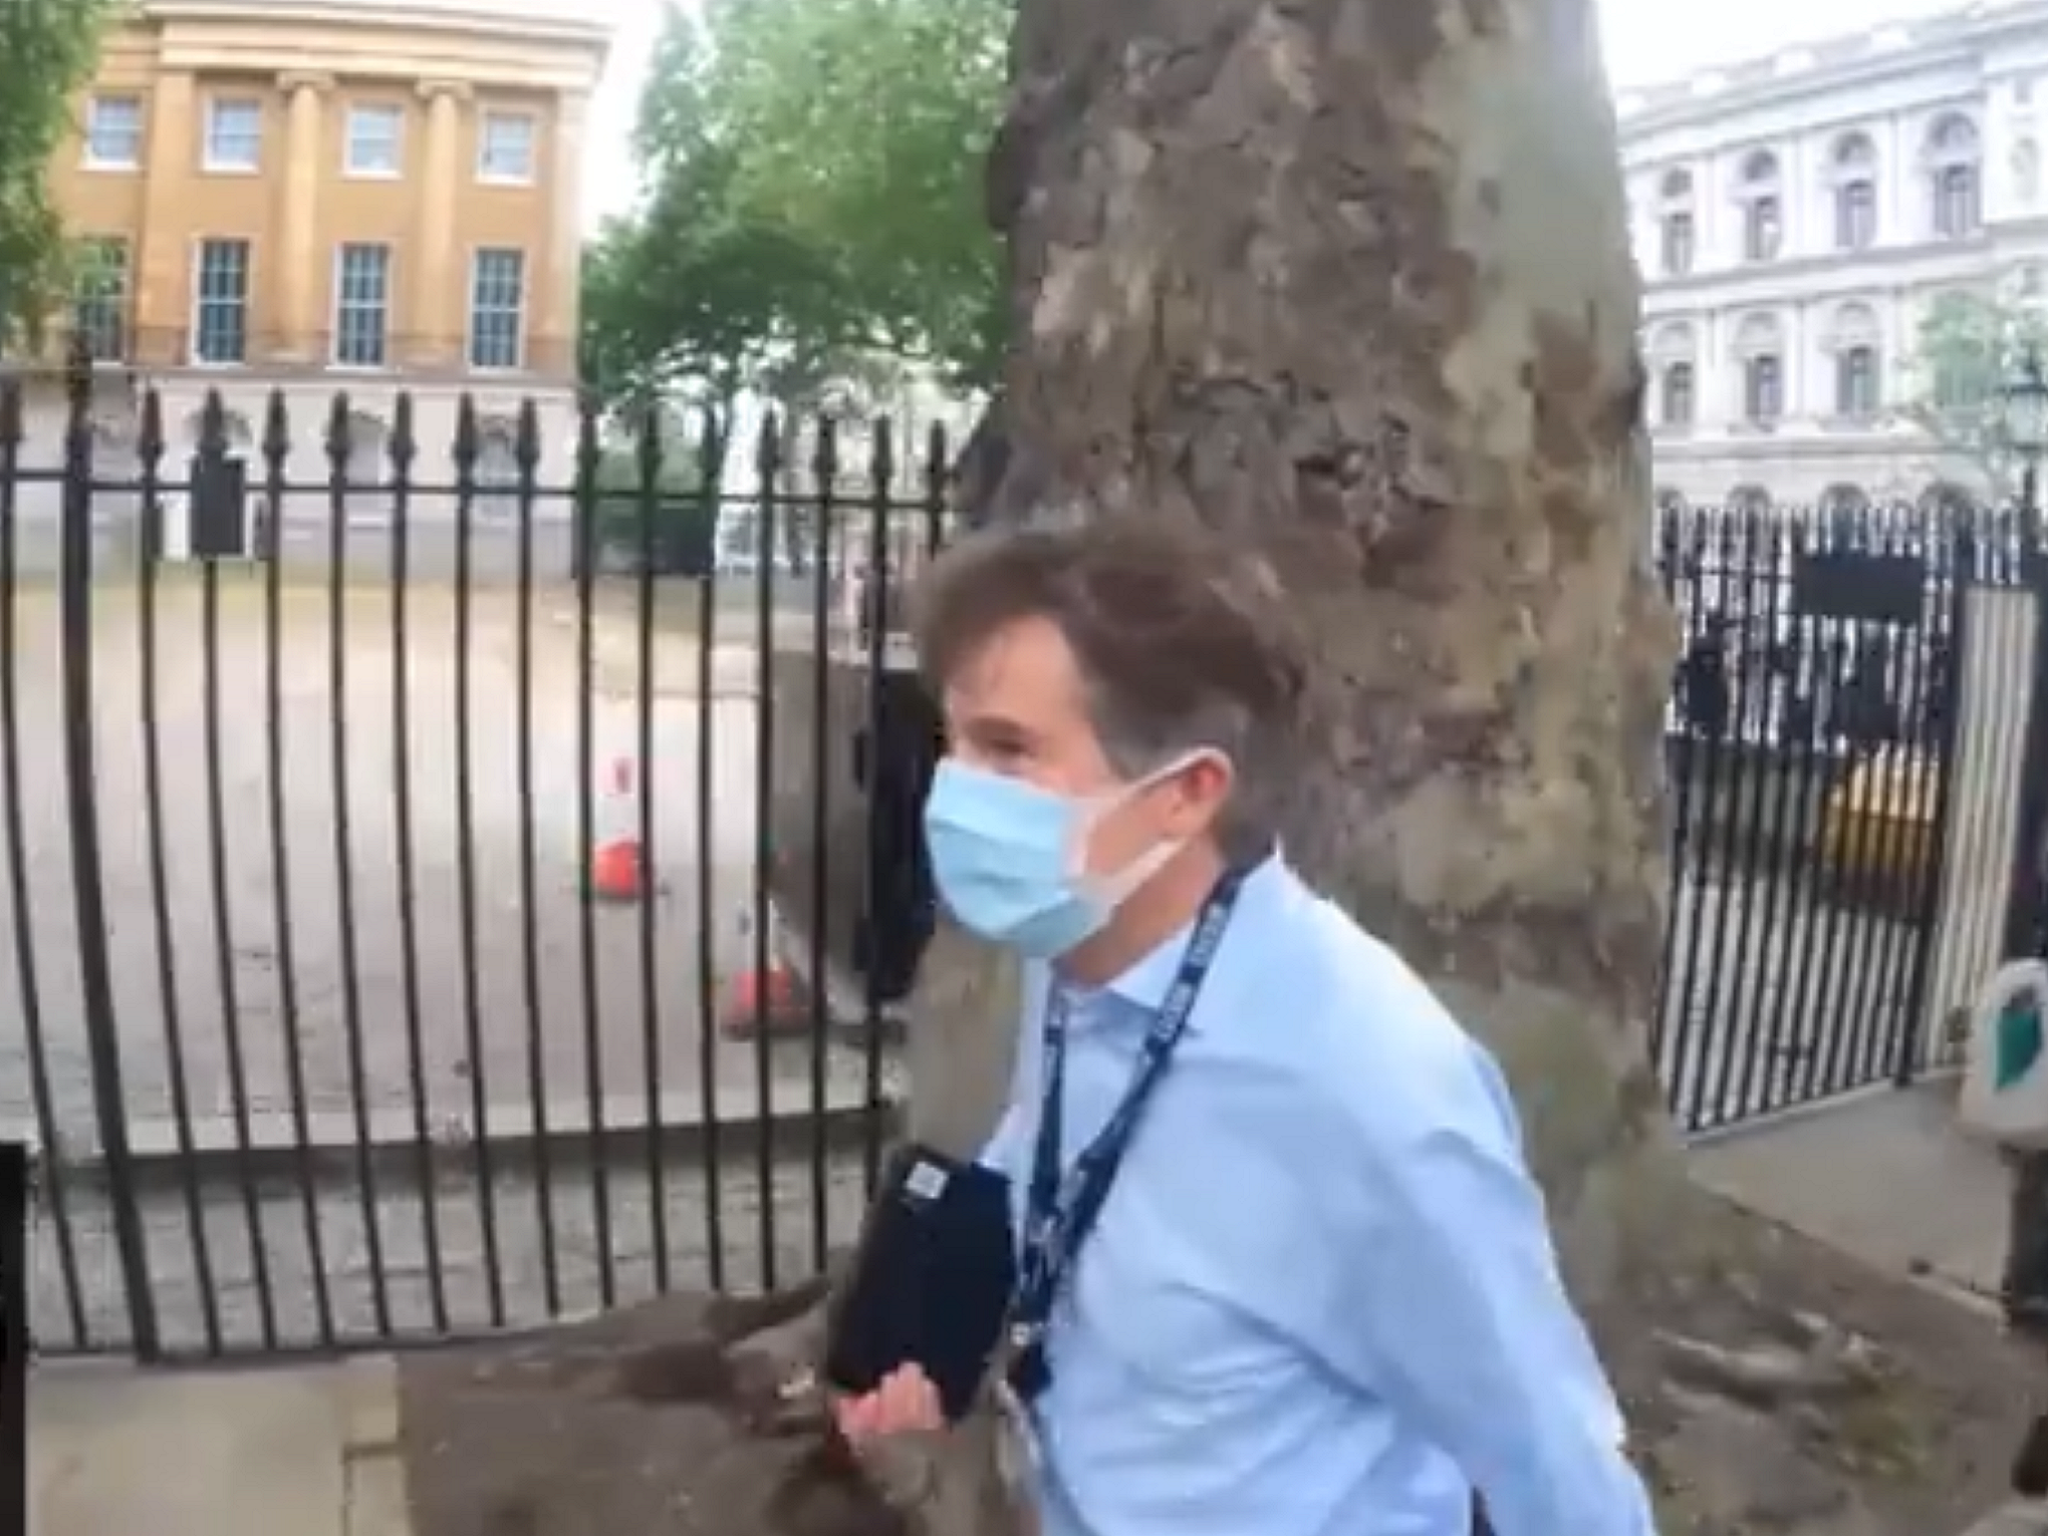 A man has been charged with a public order offence after BBC journalist Nick Watt was chased by lockdown protesters near Downing Street